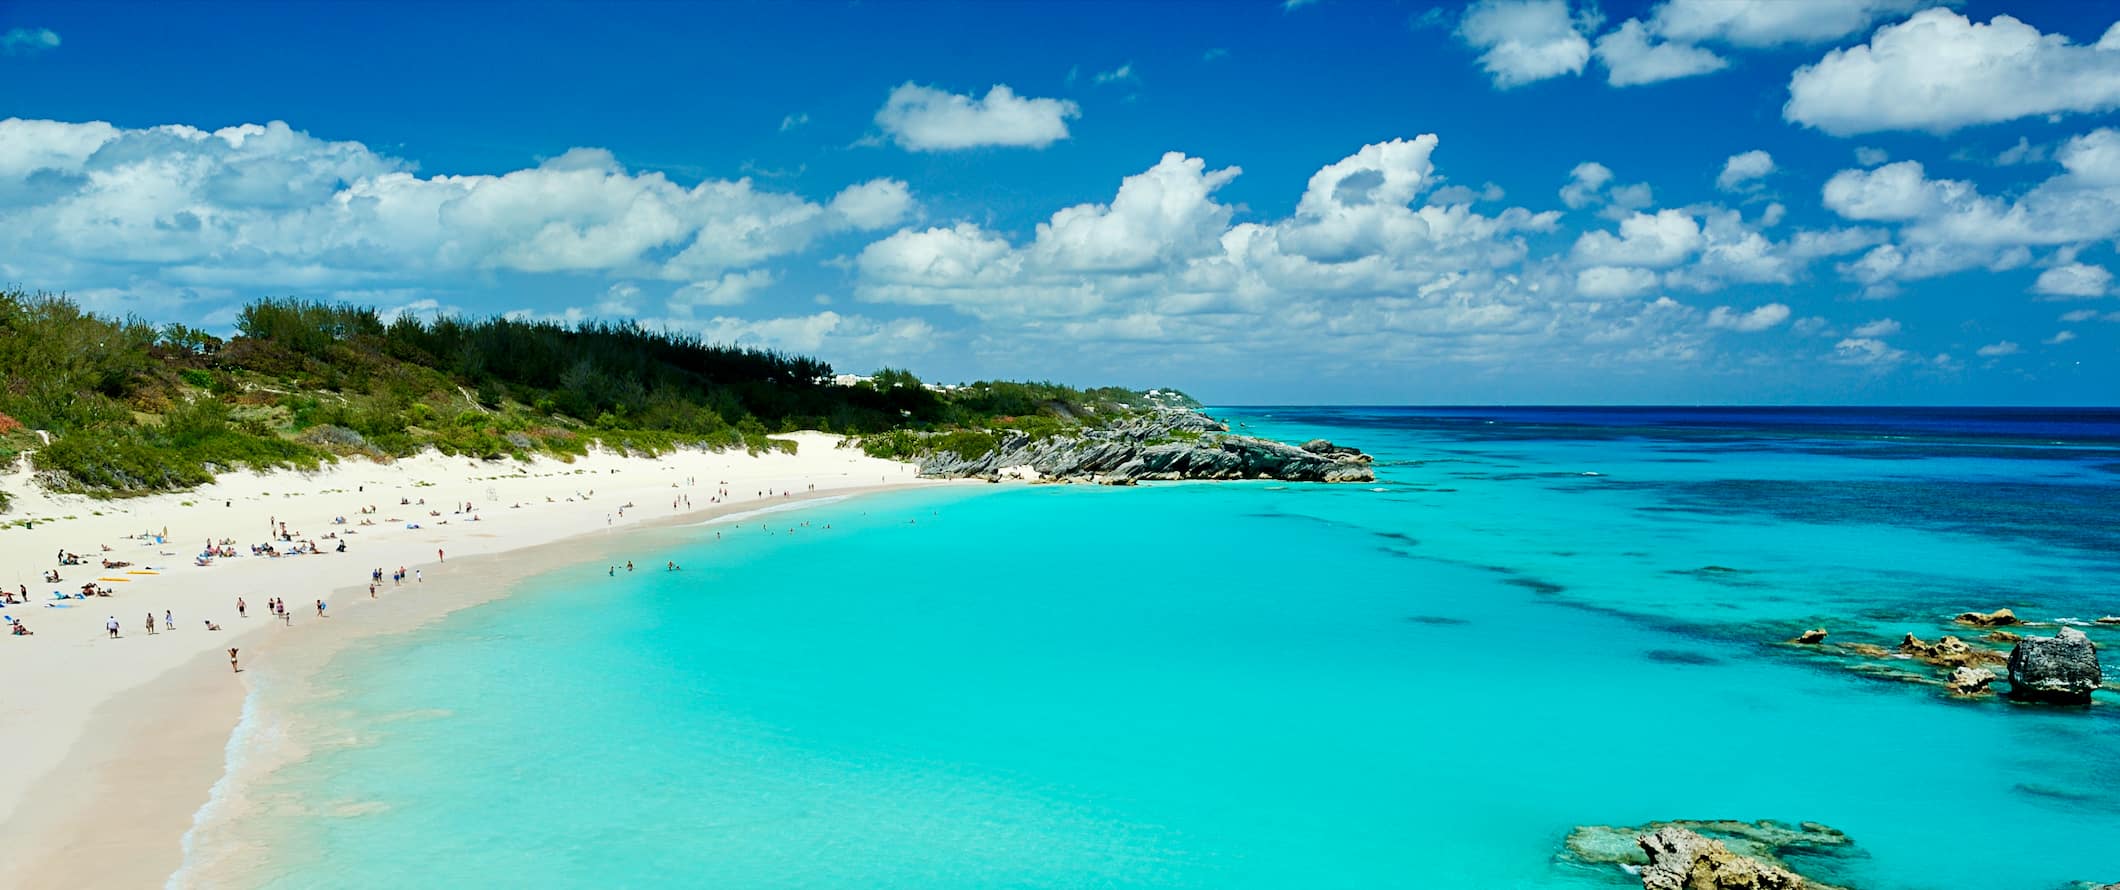 People lounging on a pristine beach with bright turquoise waters, on the beautiful coast of Bermuda